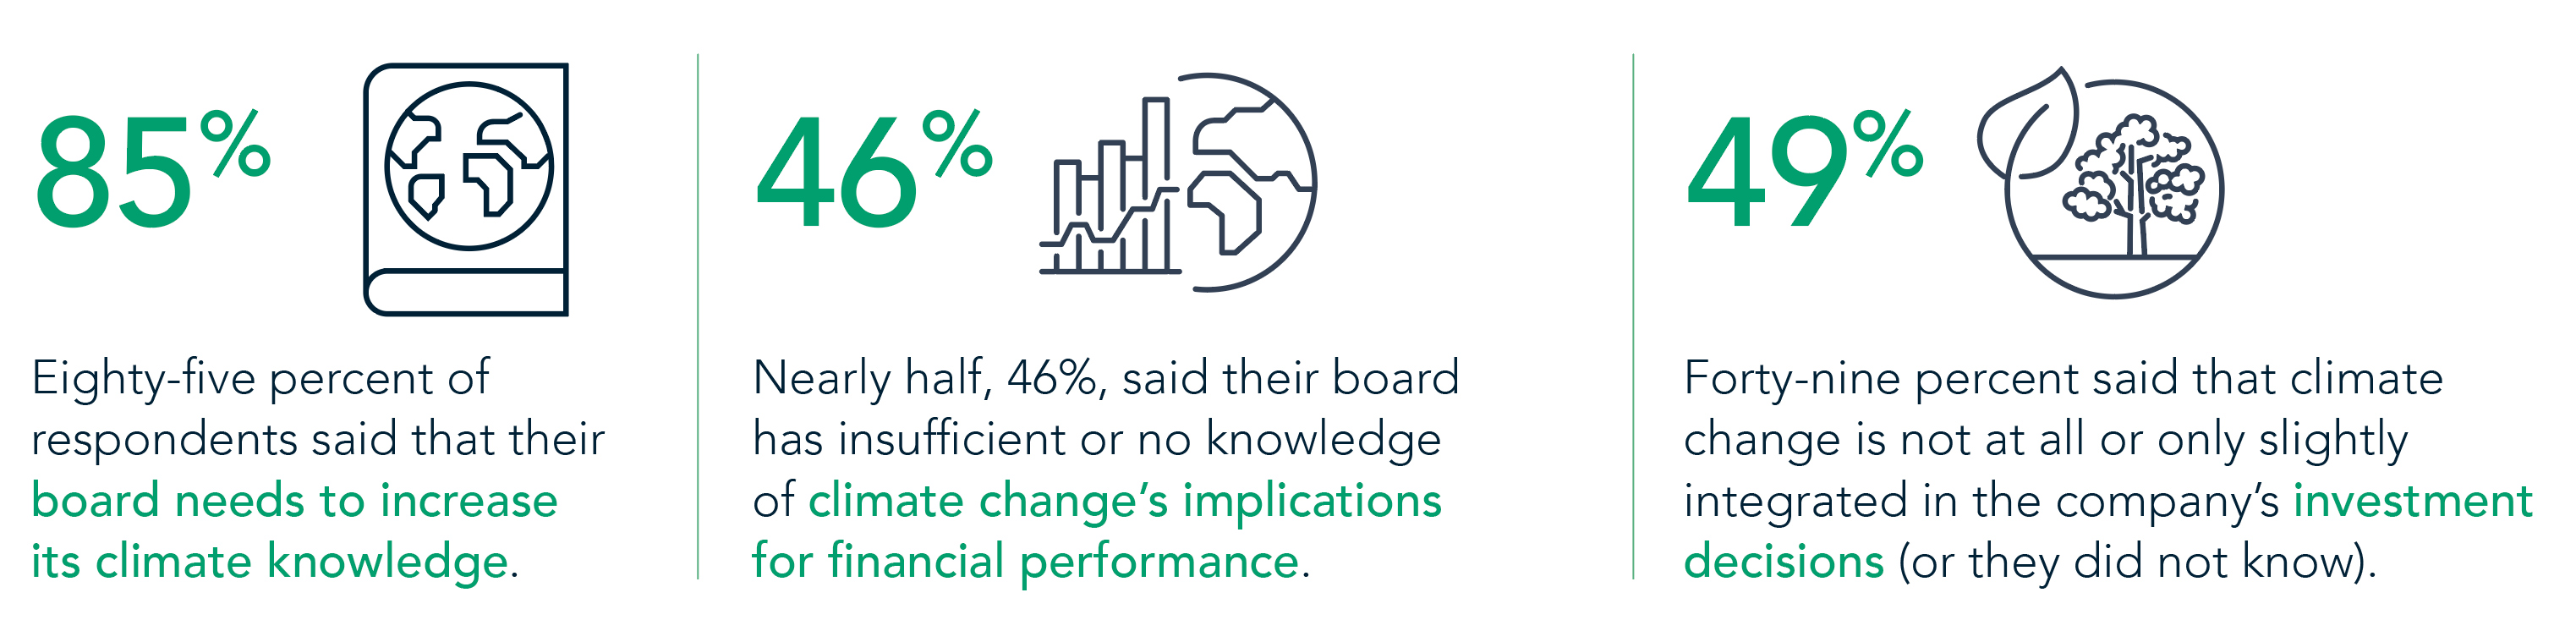 Changing the Climate in the Boardroom image